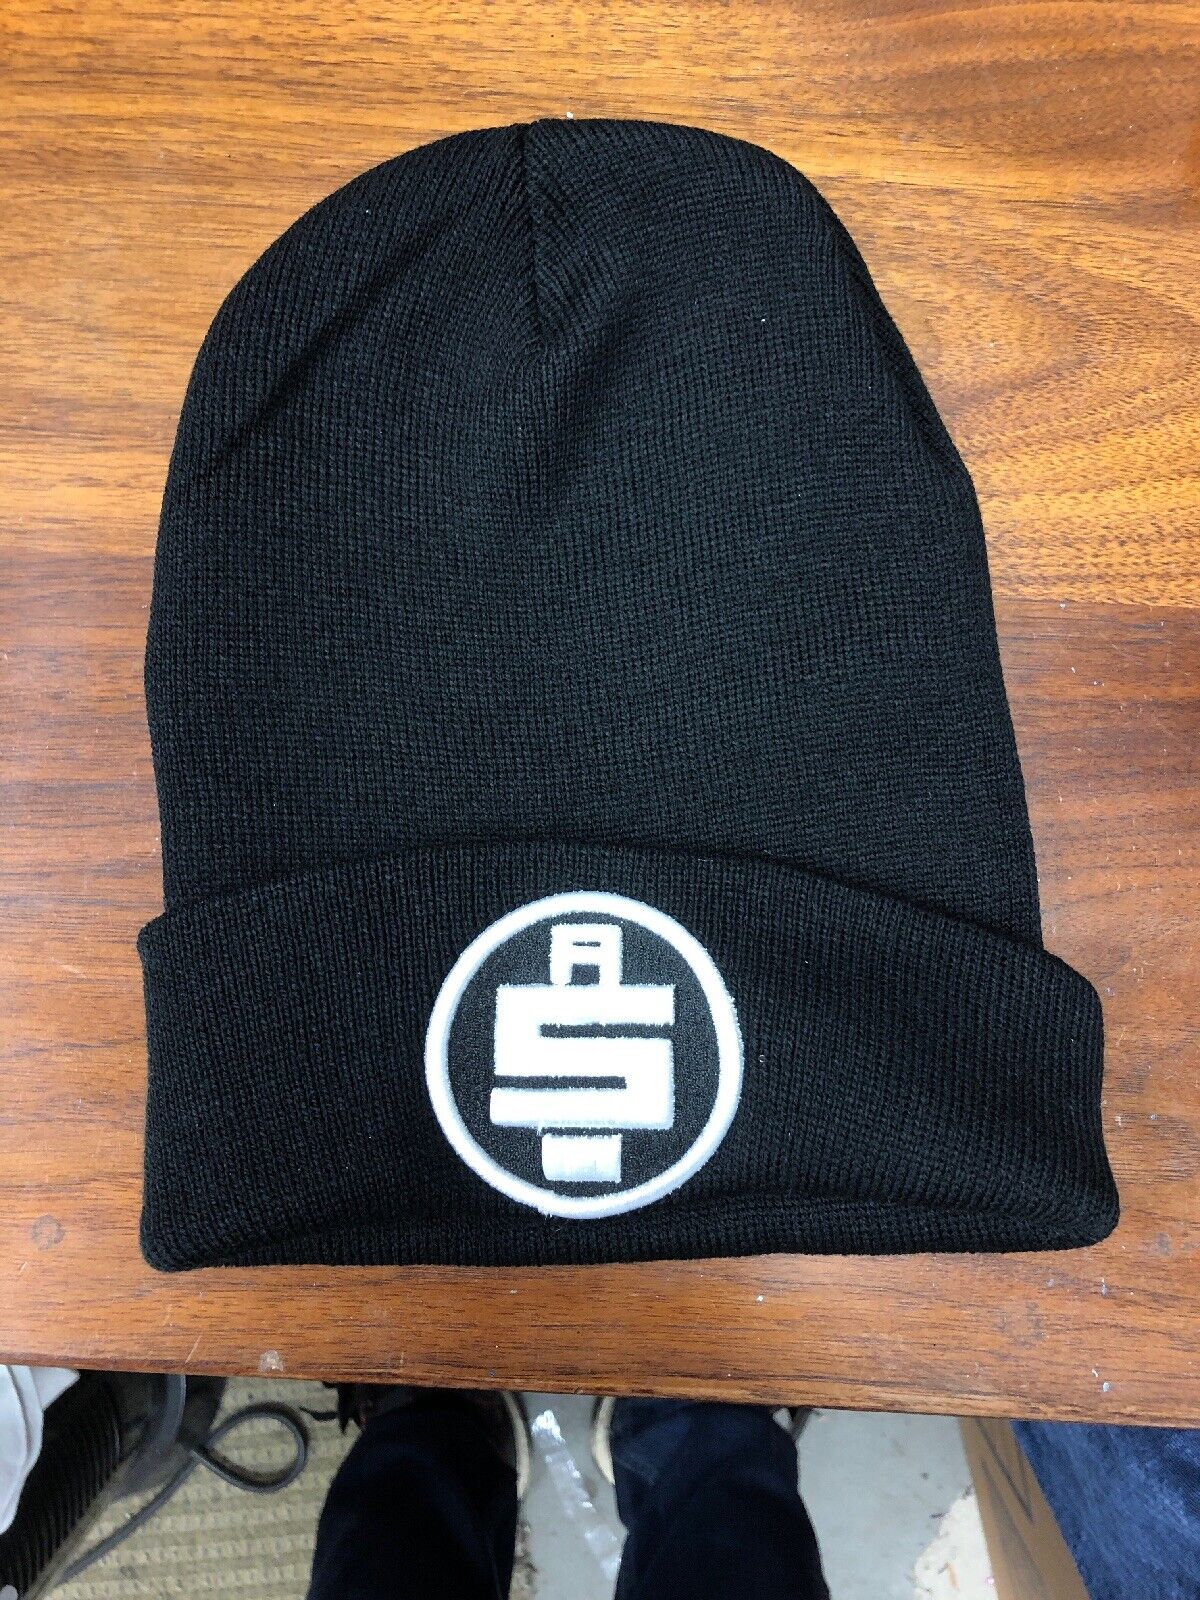 The Marathon Continues Nipsey Hussle Rare Black All Money In OS Beanie Sold  OUT! | eBay